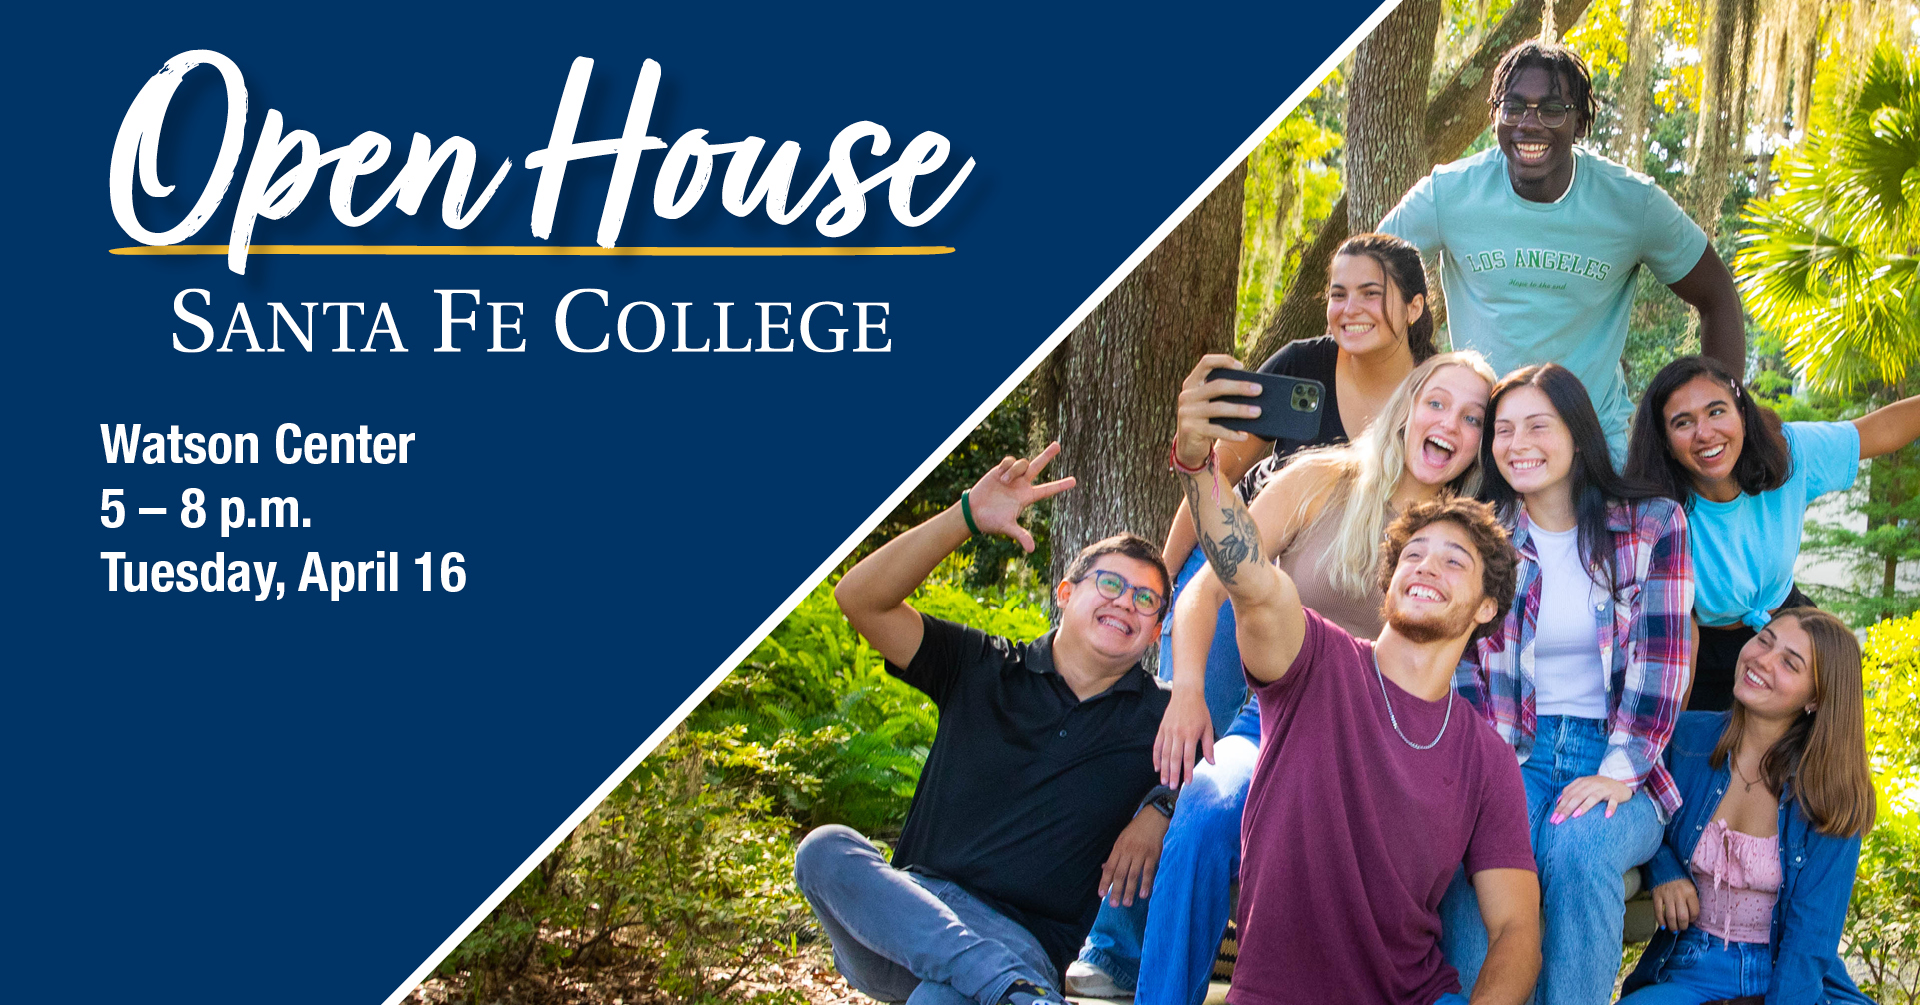 A photo of a group of people taking a selfie is next to textual information about Open House.